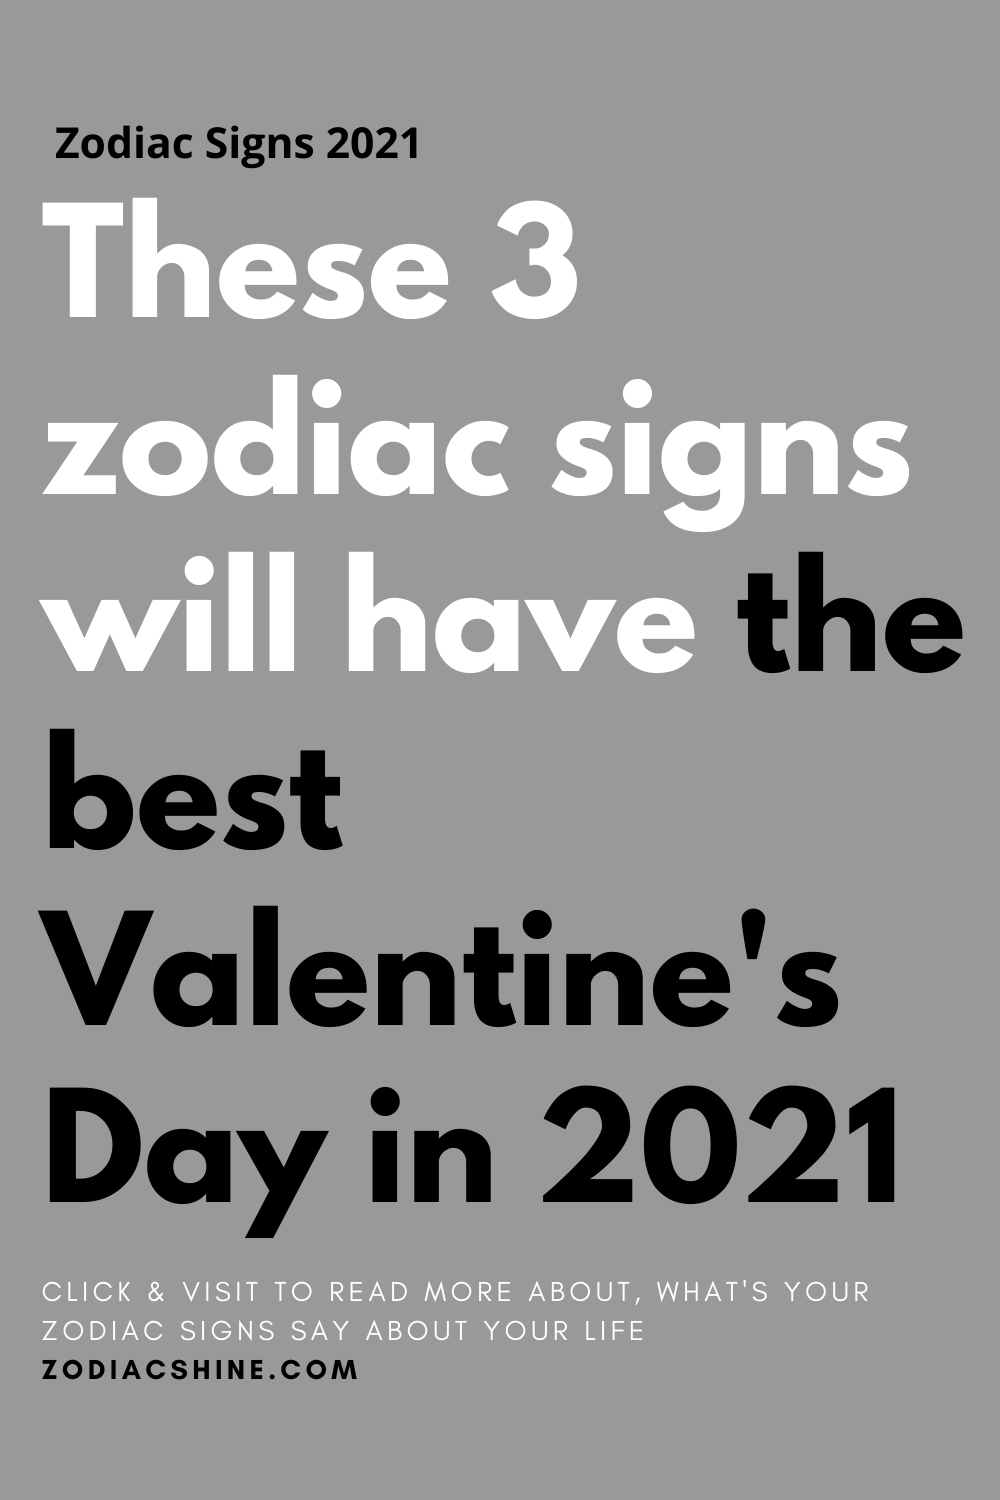 These 3 zodiac signs will have the best Valentine's Day in 2021